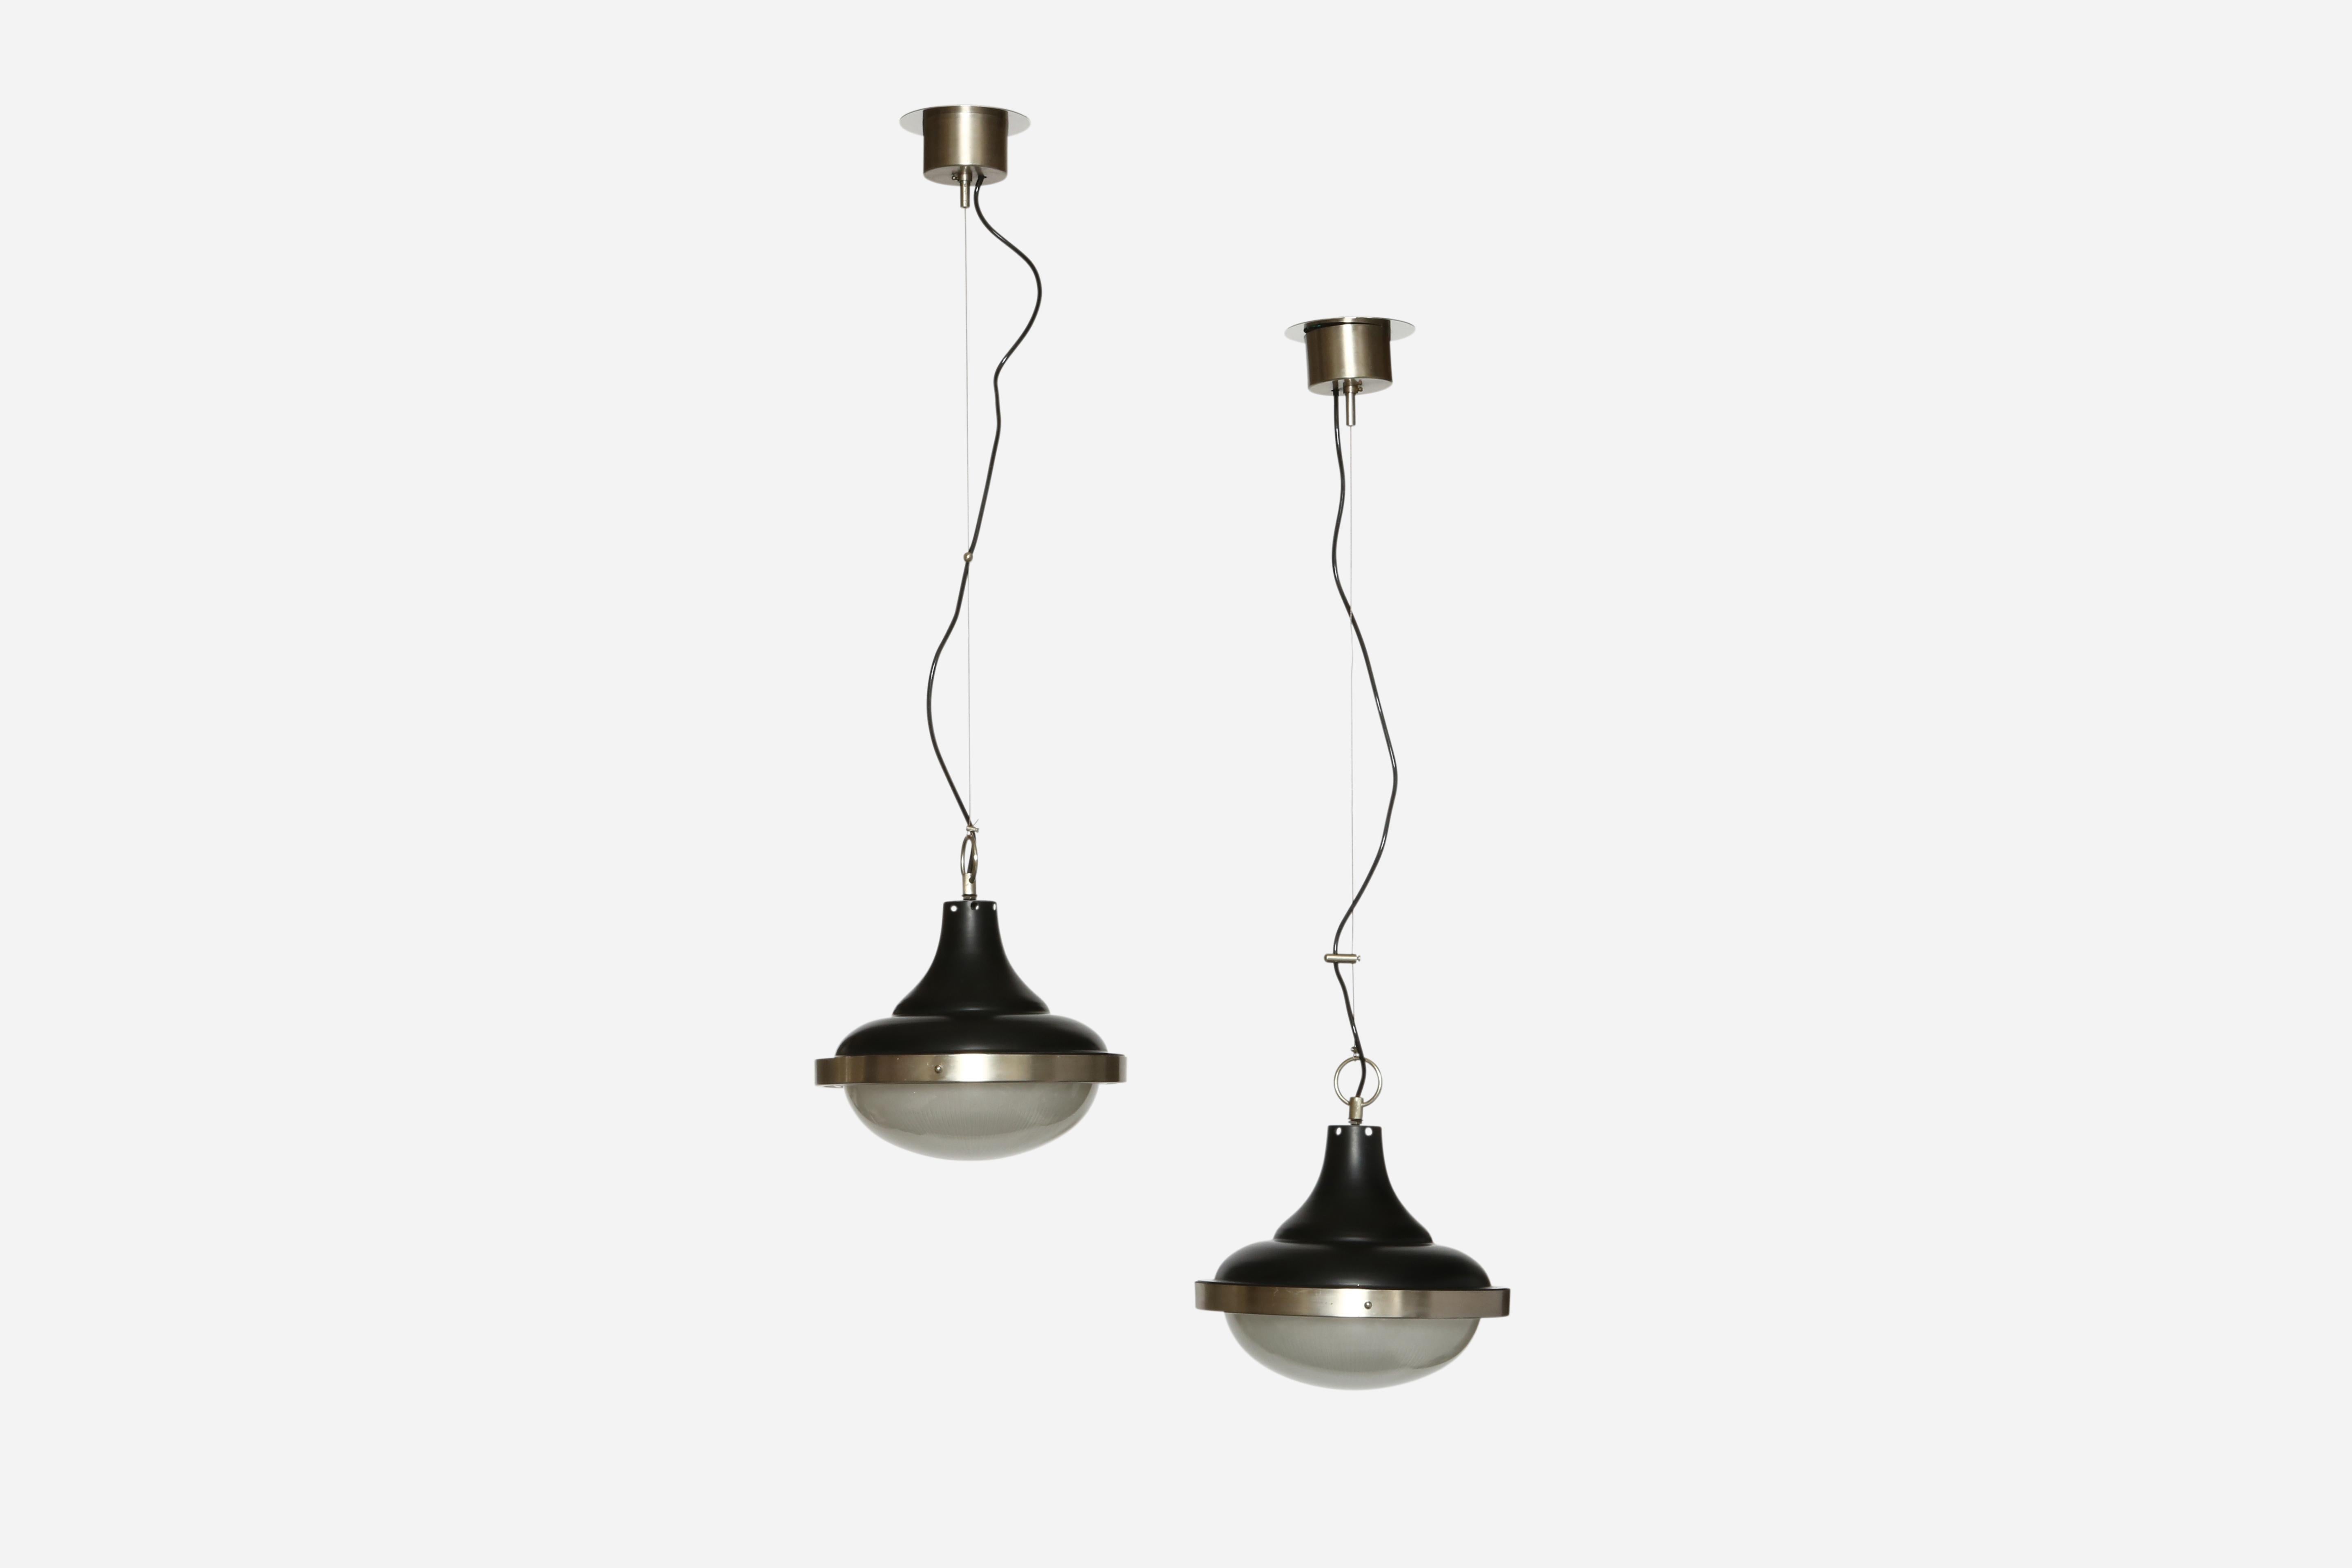 Sergio Mazza style suspension lights, a pair.
Designed and manufactured in Italy, 1960s
Glass, enameled metal, nickel plated brass.
Overall drop is adjustable.
Takes one medium bulb each.
Complimentary US rewiring upon request.

At Illustris